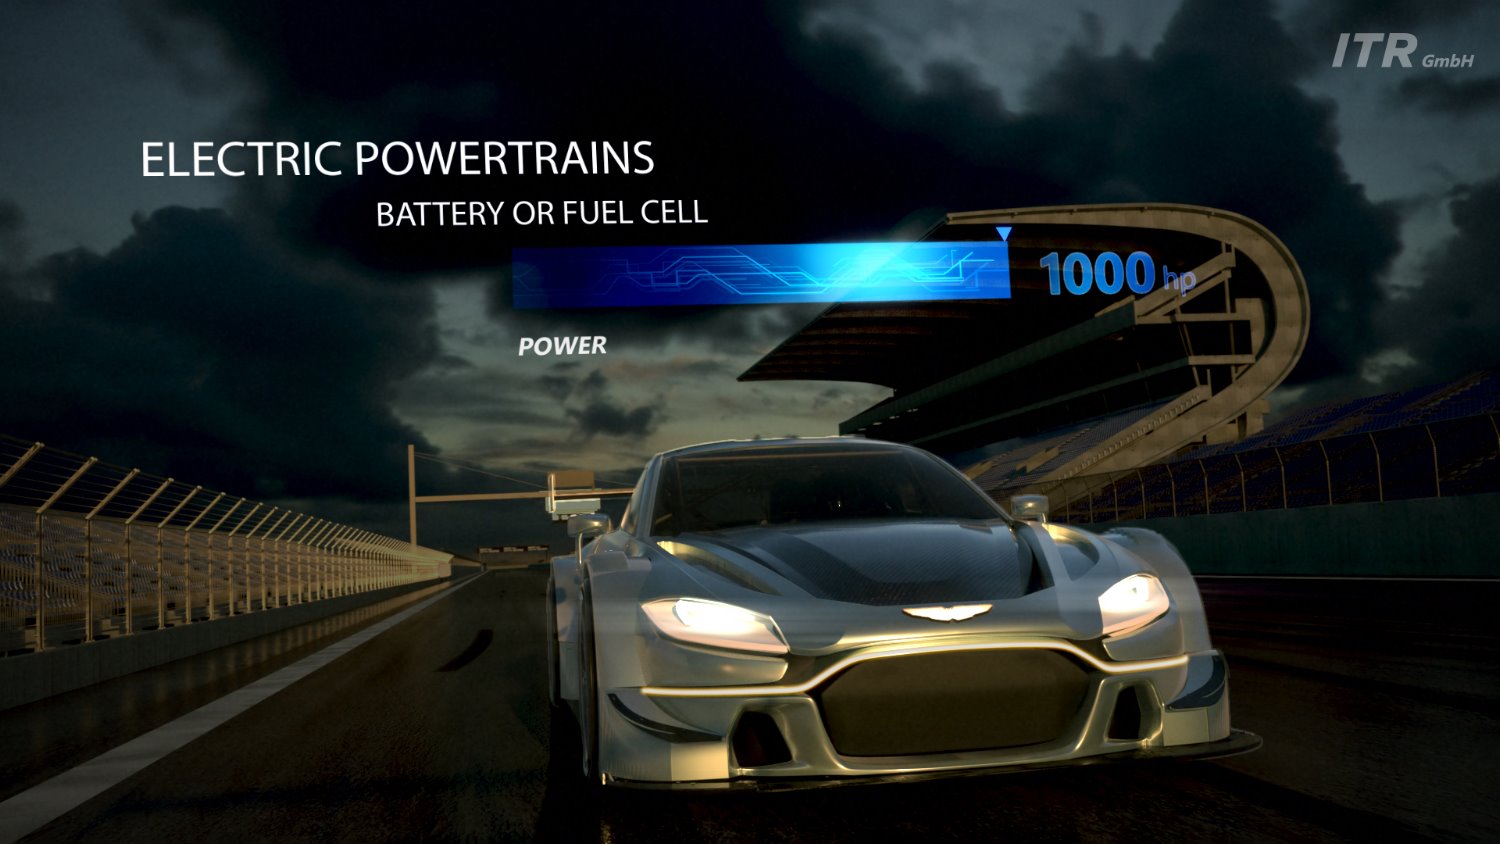 Peak power of 1000bhp available for brief periods